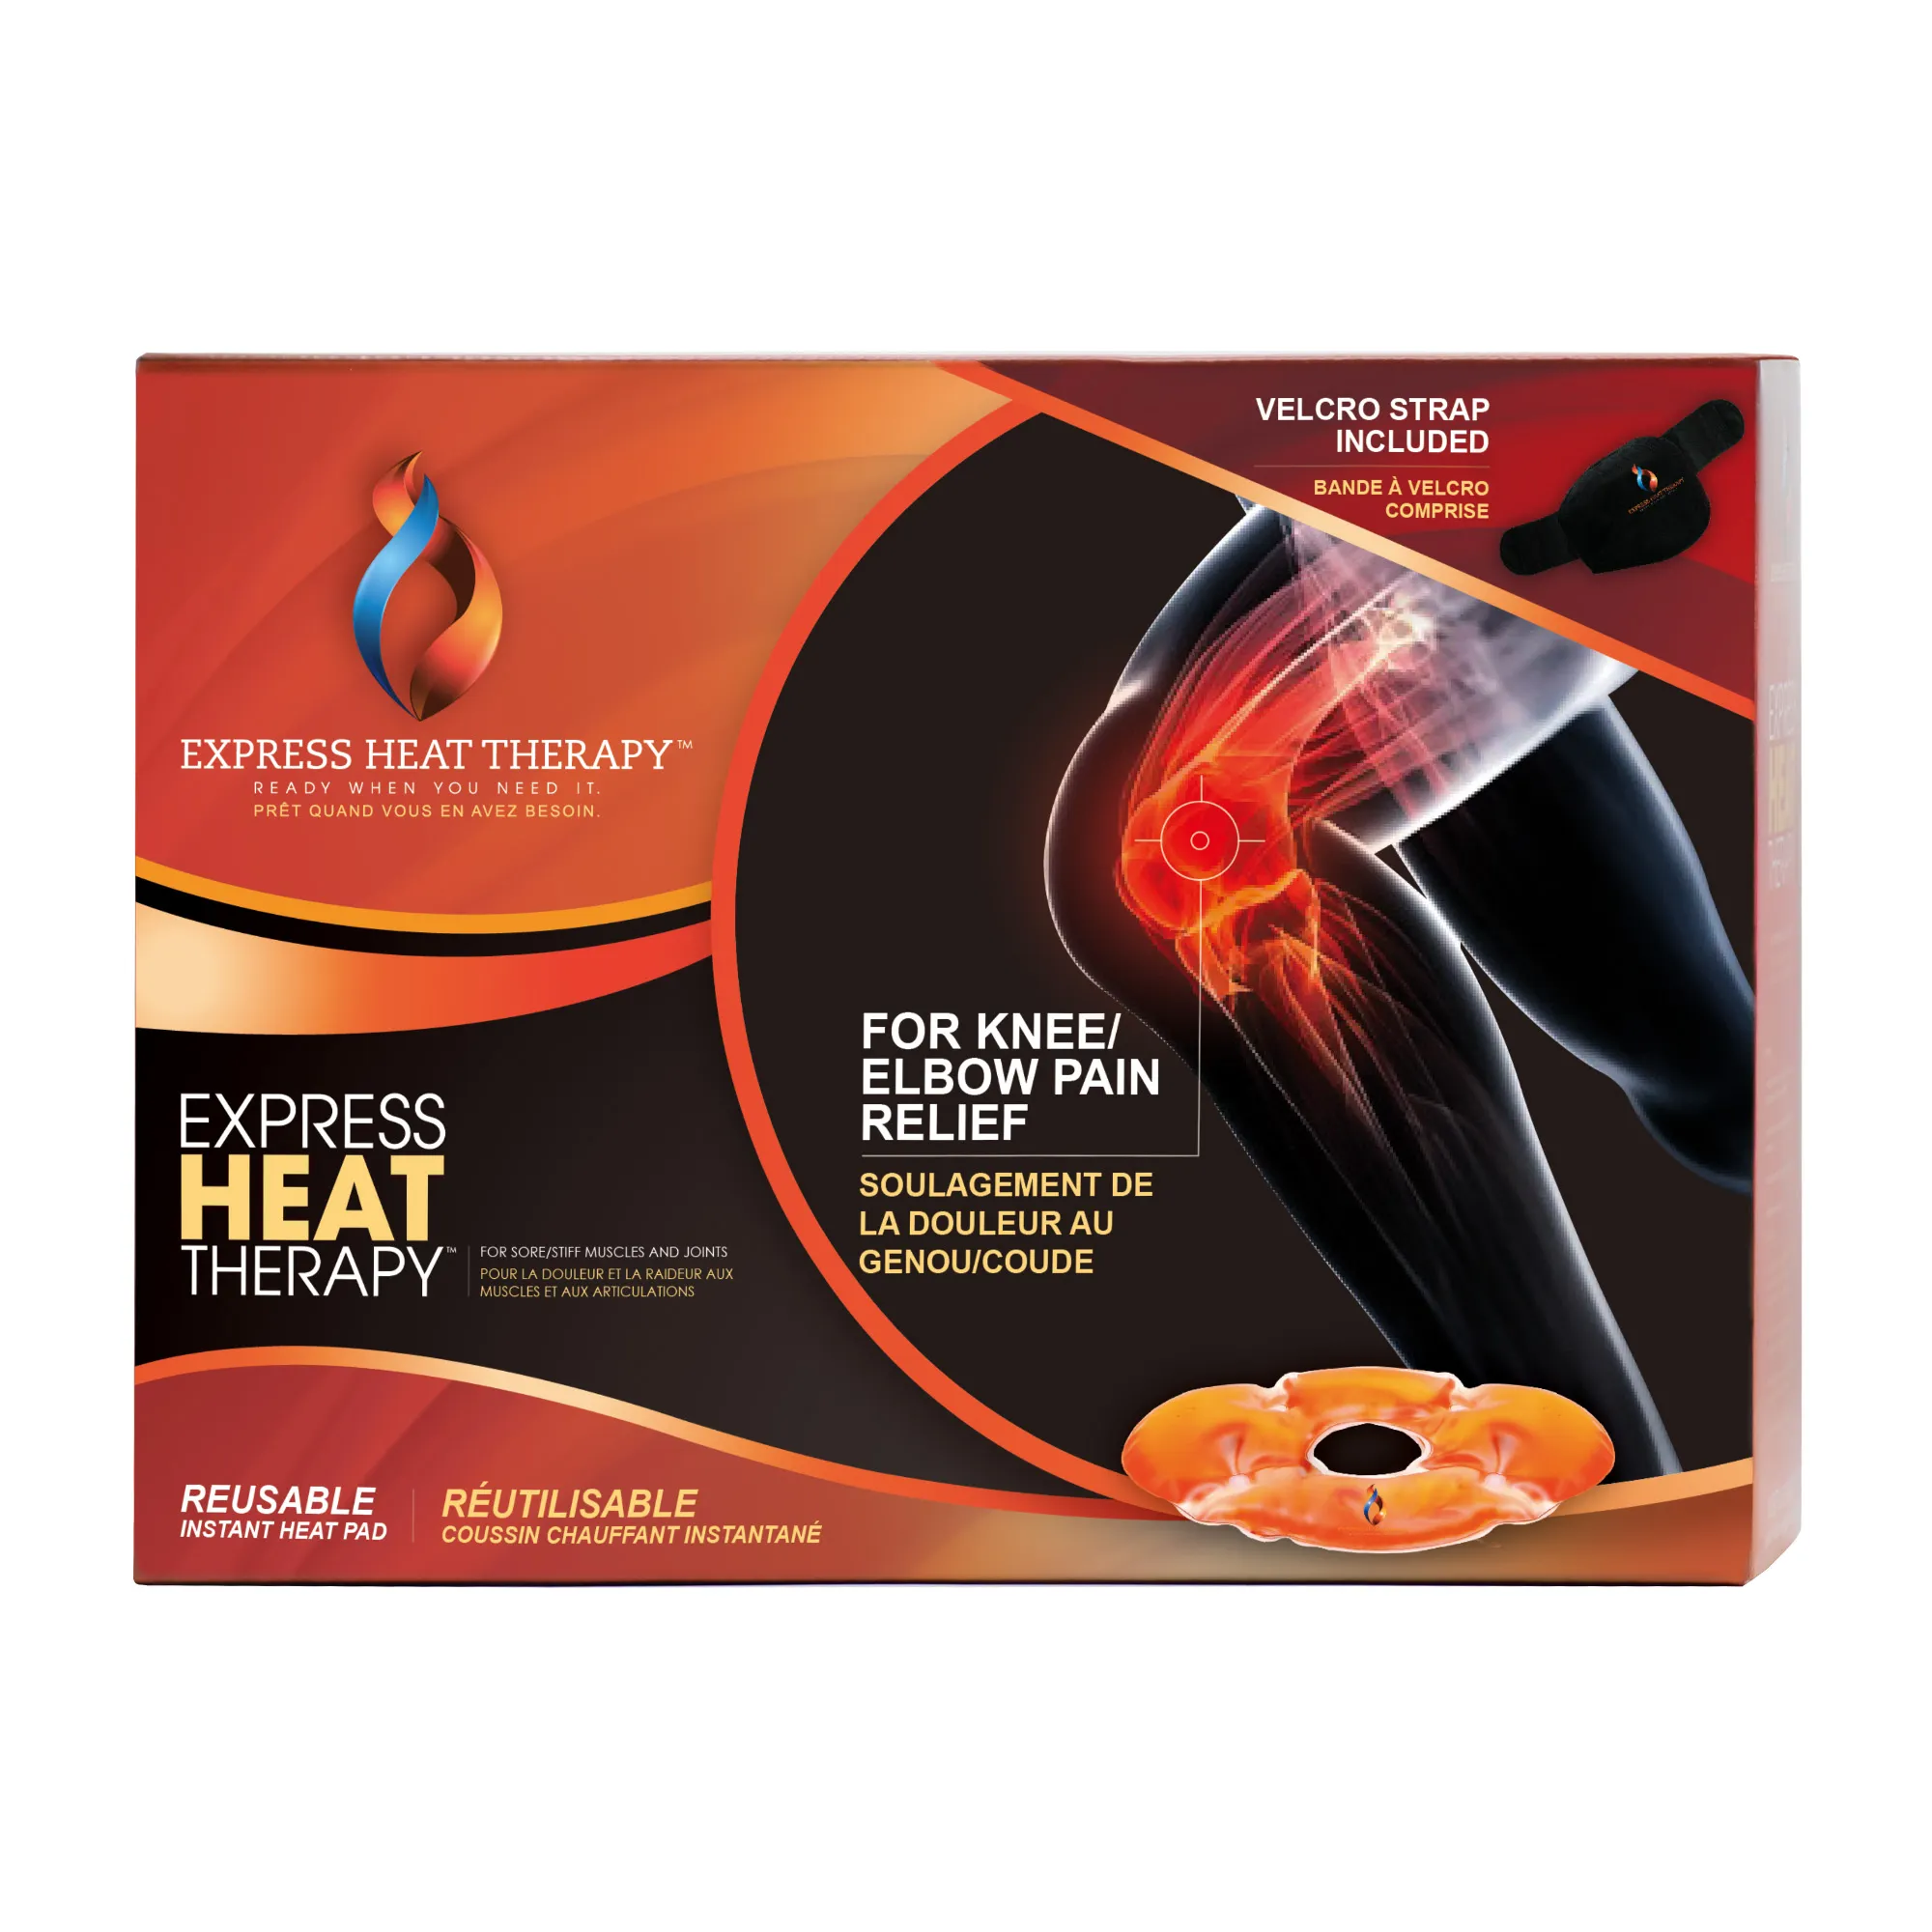 Buy Heating Pad for Knee Pain & Elbow Pain - Express Heat Therapy